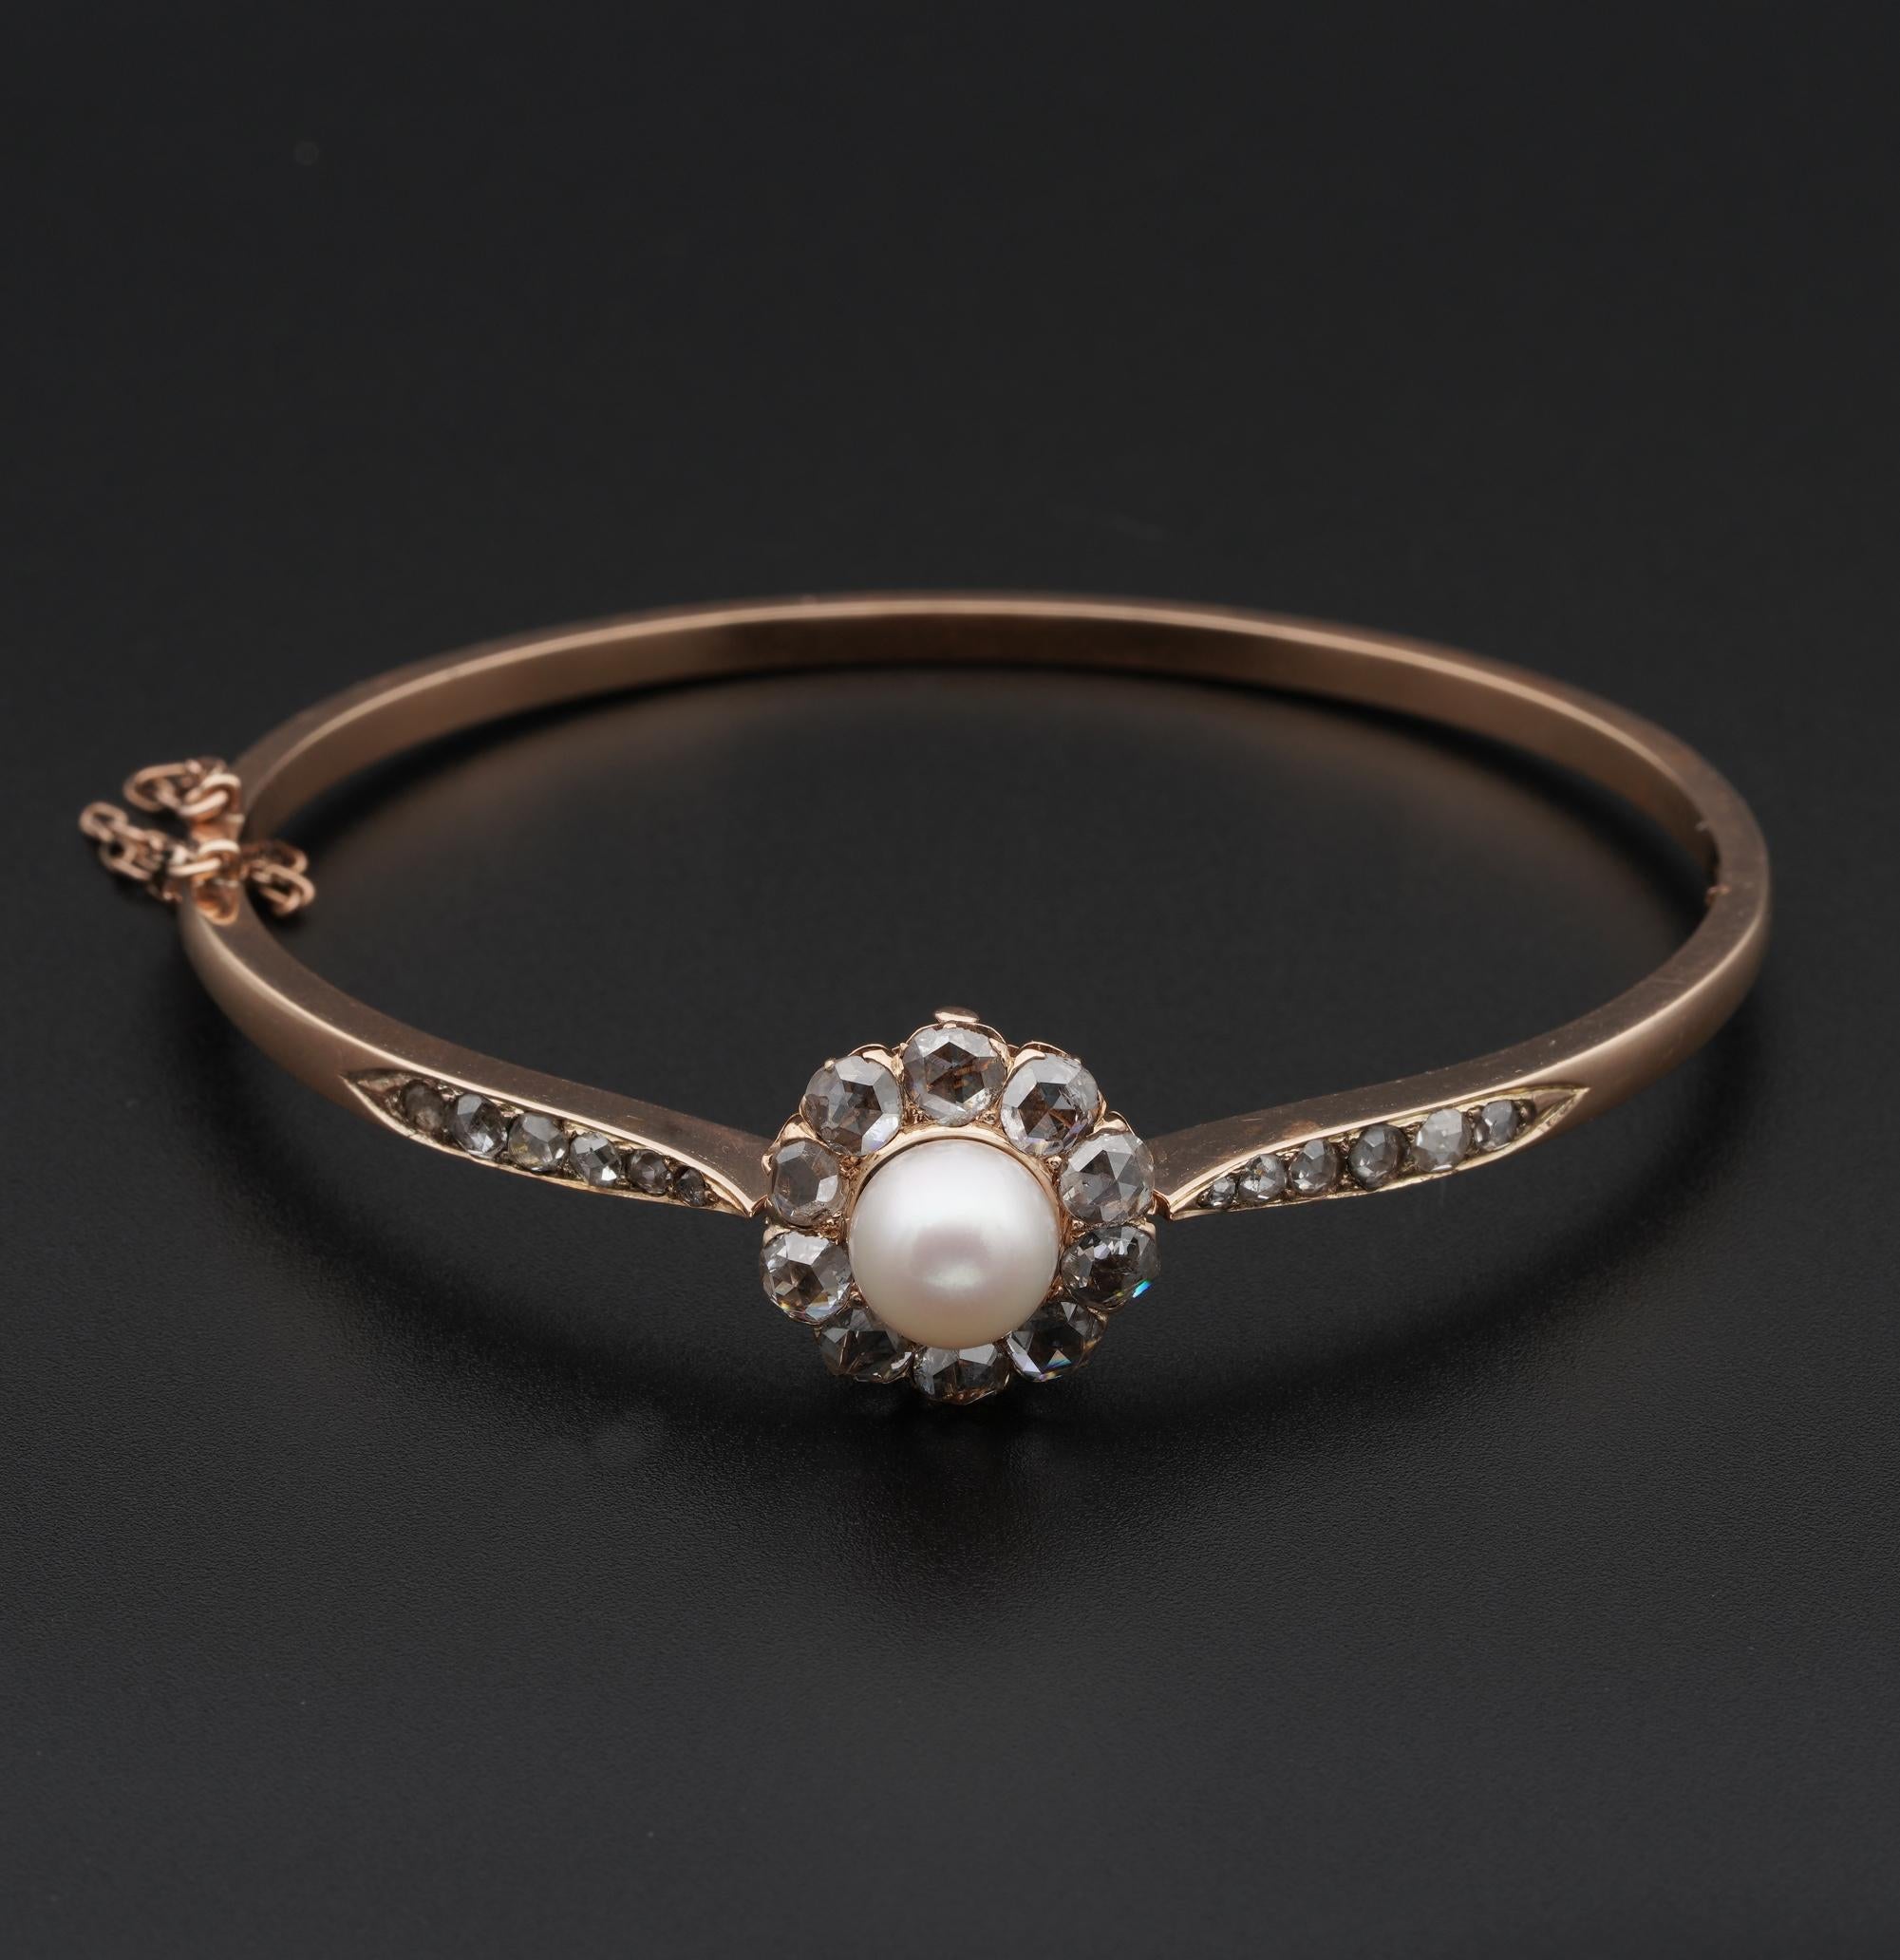 Simply exquisite Victorian era bangle 1870 ca; hand crafted as unique of solid 18 Kt rose gold not marked.
Charming Daisy of Diamonds centred by a Pearl gem with further Diamonds chasing the sides. This was what a lady of the Victorian period used